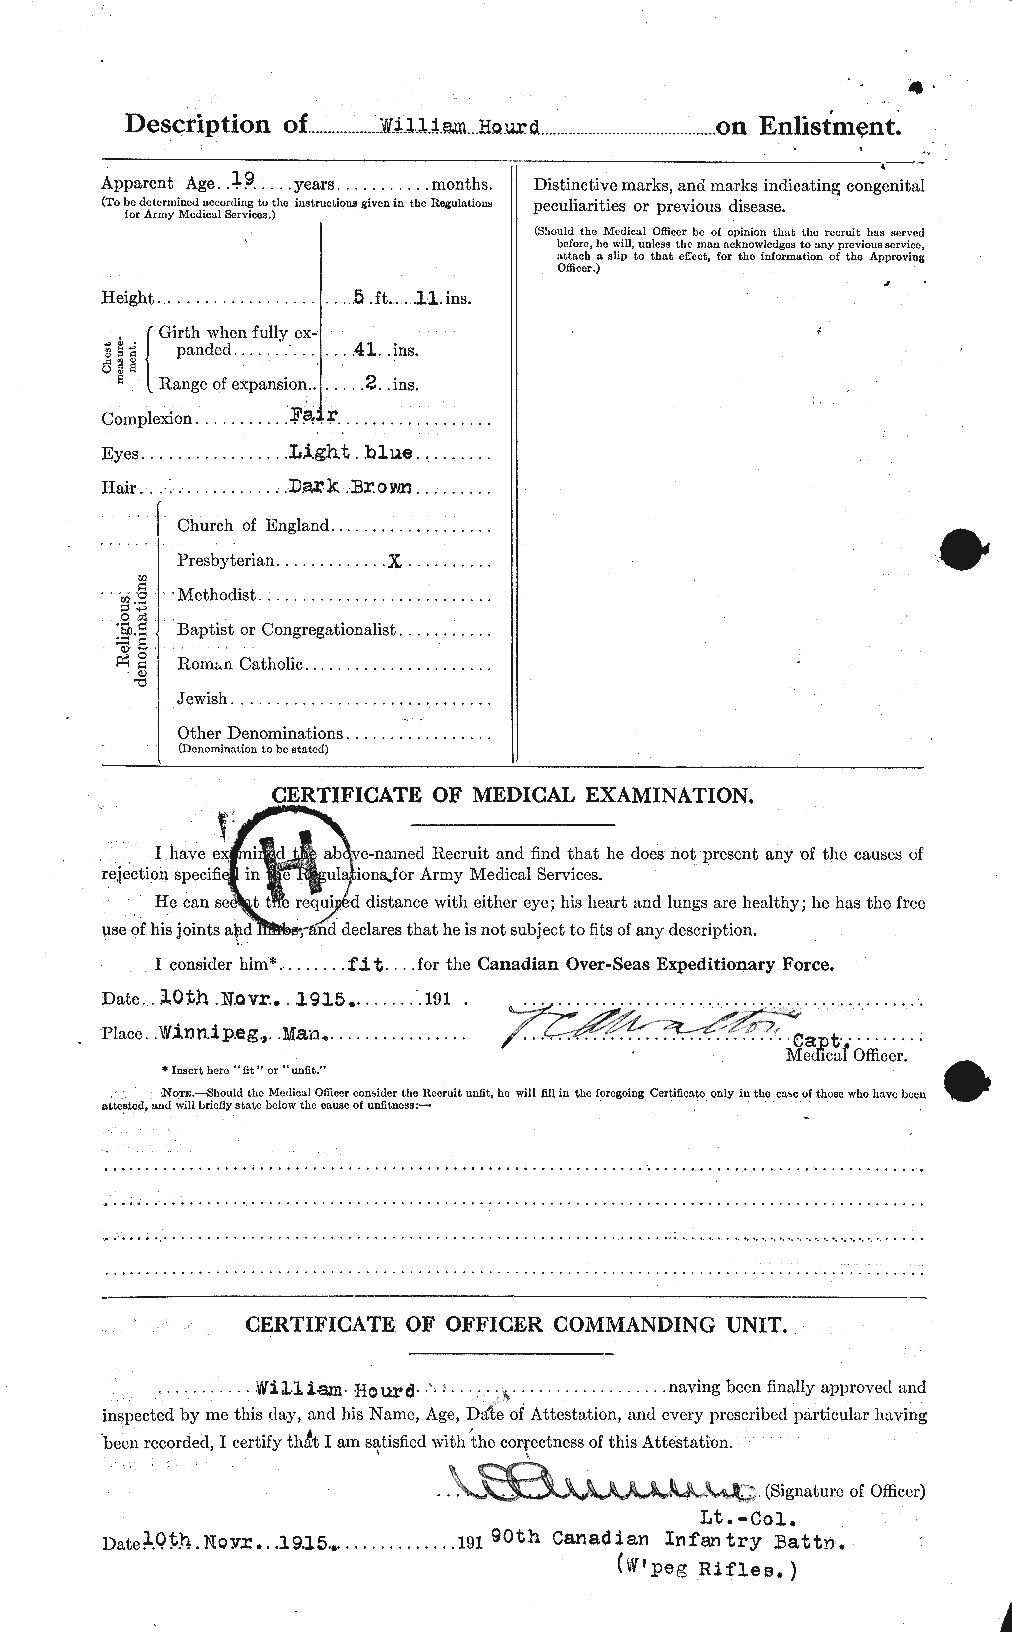 Personnel Records of the First World War - CEF 400560b